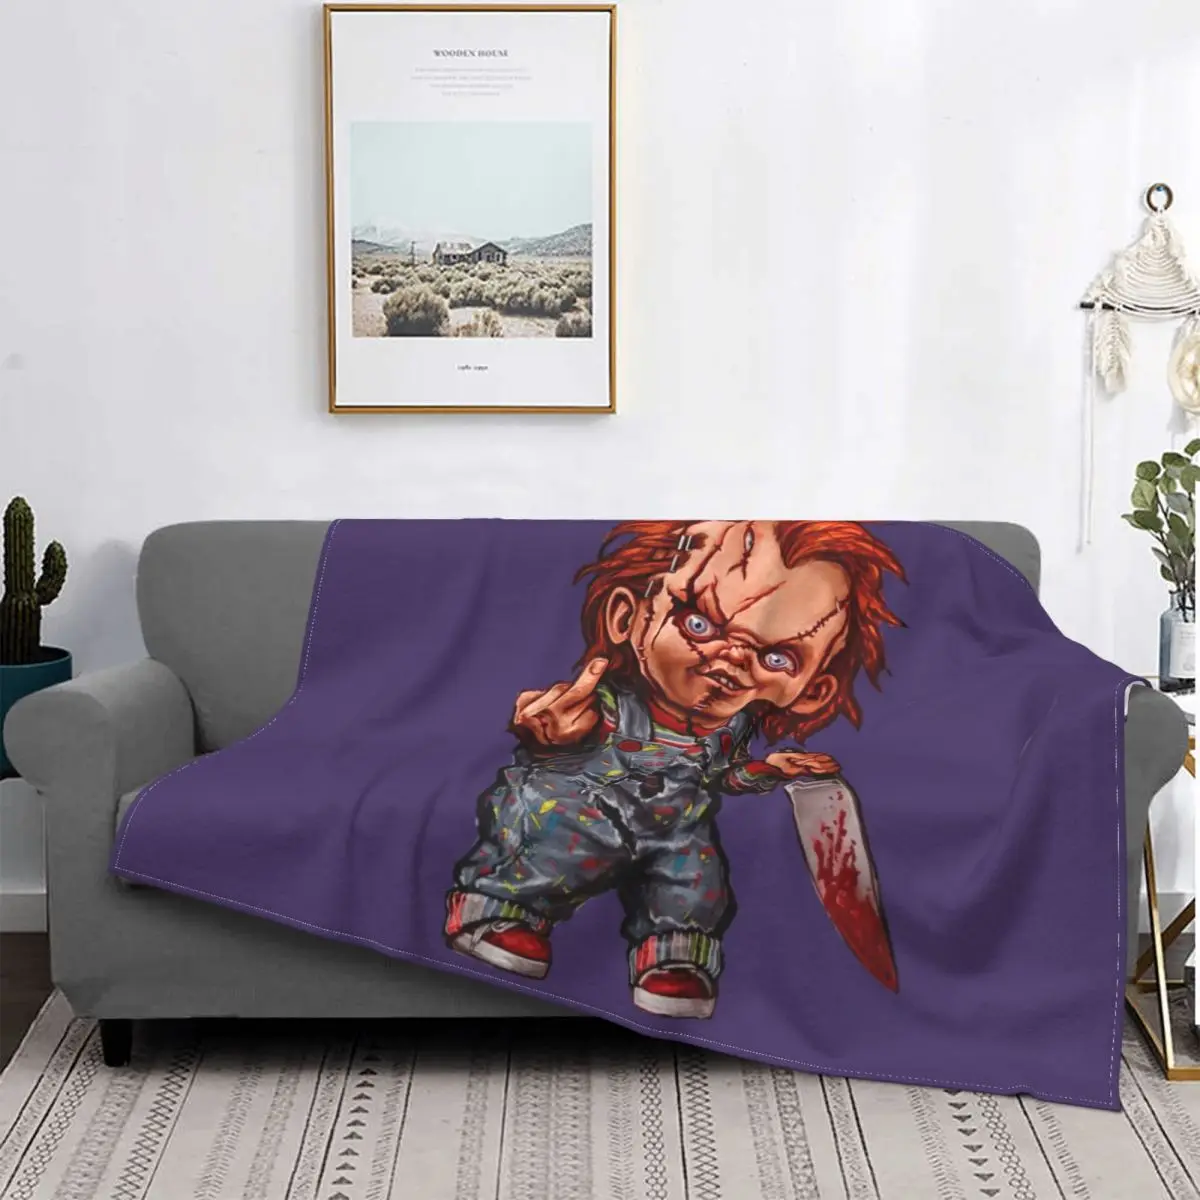 

My Bride Childs Play Blanket 3D Print Soft Flannel Chucky Horror Movie Throw Blankets for Office Bed Couch Quilt Fleece Warm